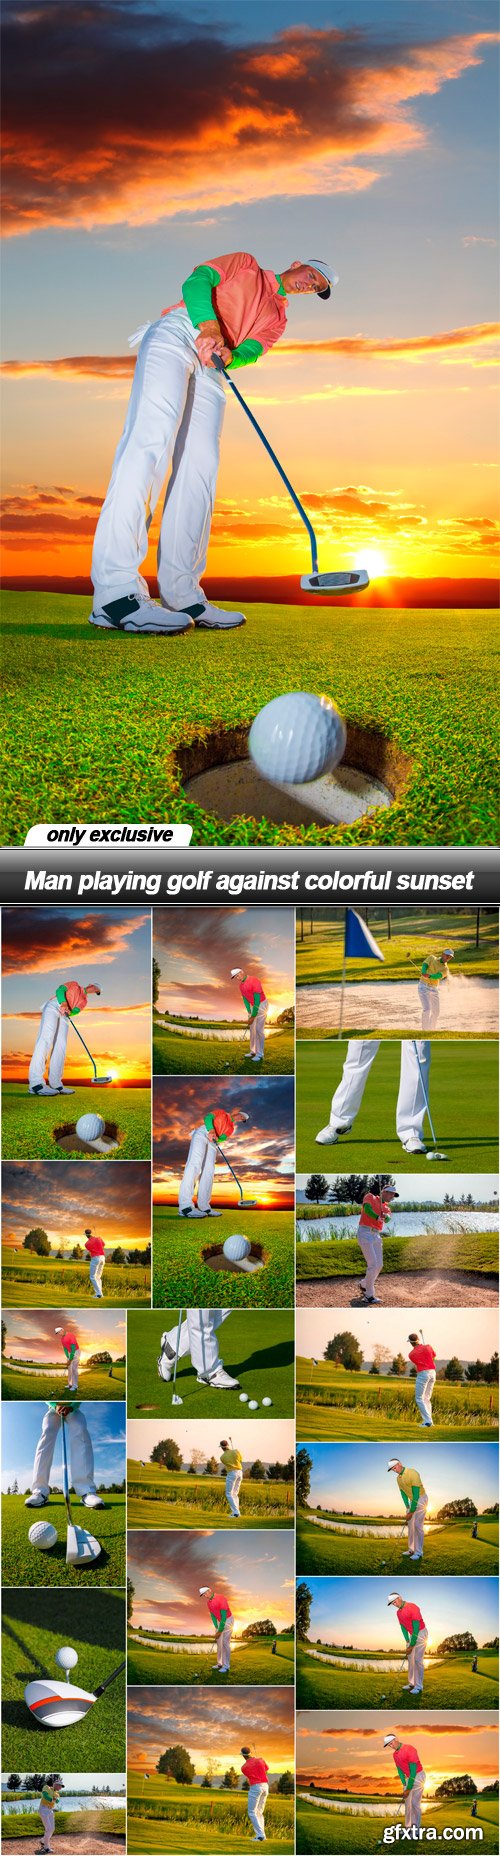 Man playing golf against colorful sunset - 19 UHQ JPEG